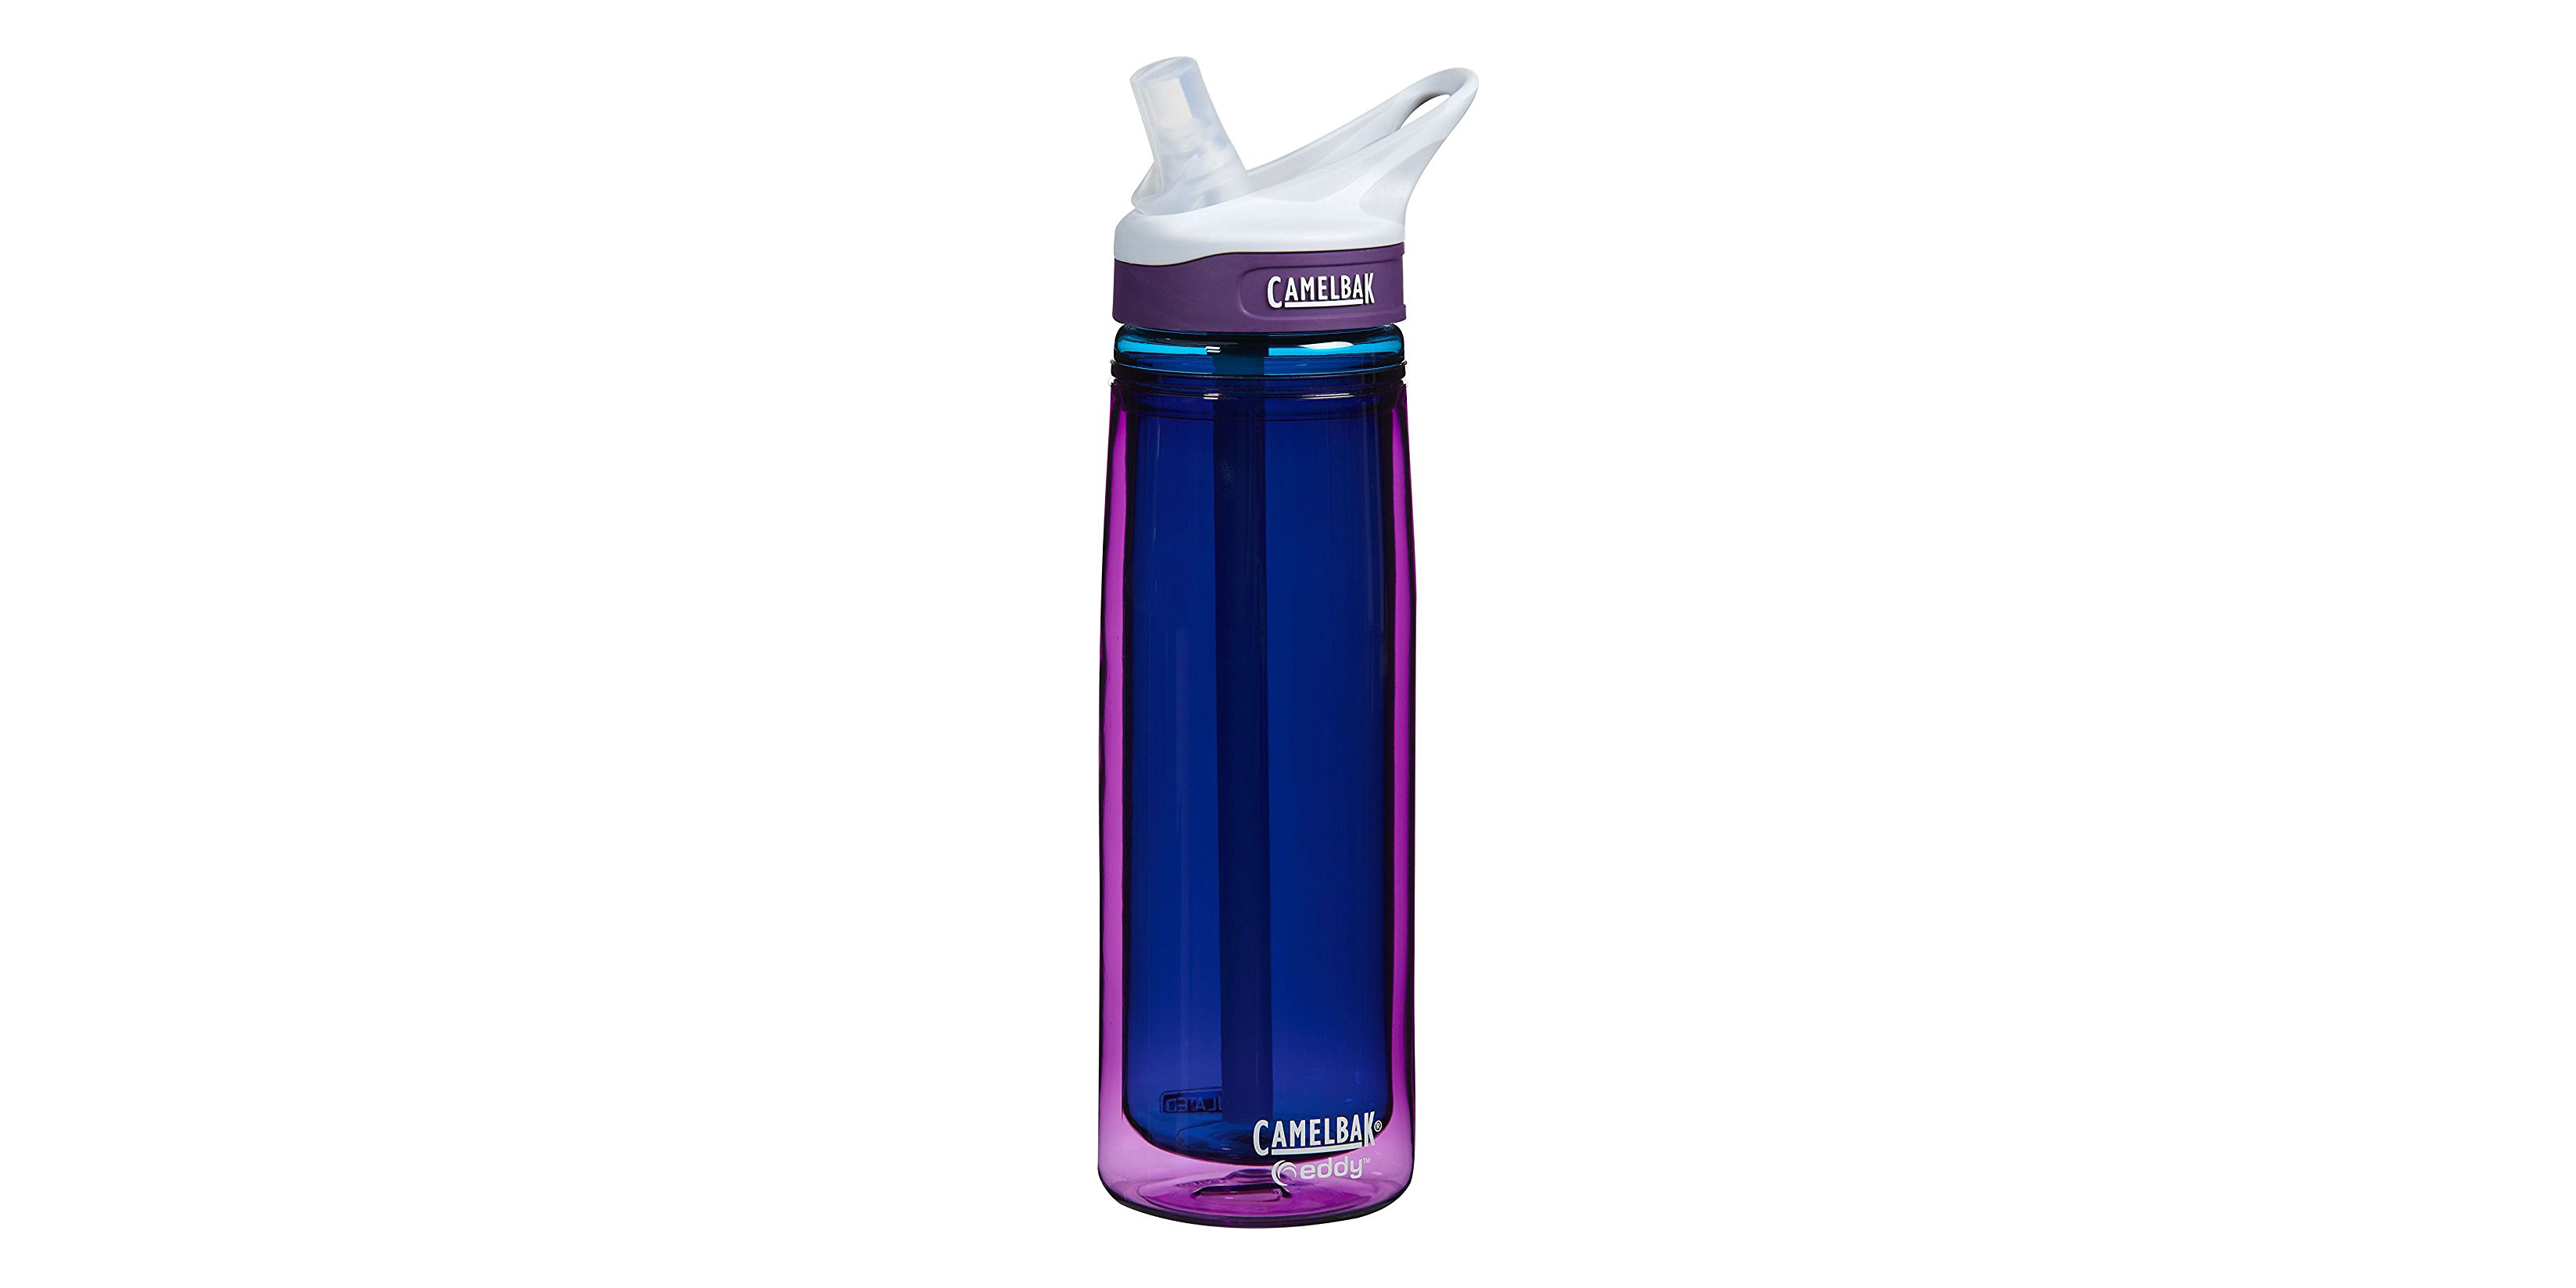 A top-rated CamelBak Insulated Water Bottle for $9? Score it from Amazon for $8.50 shipped